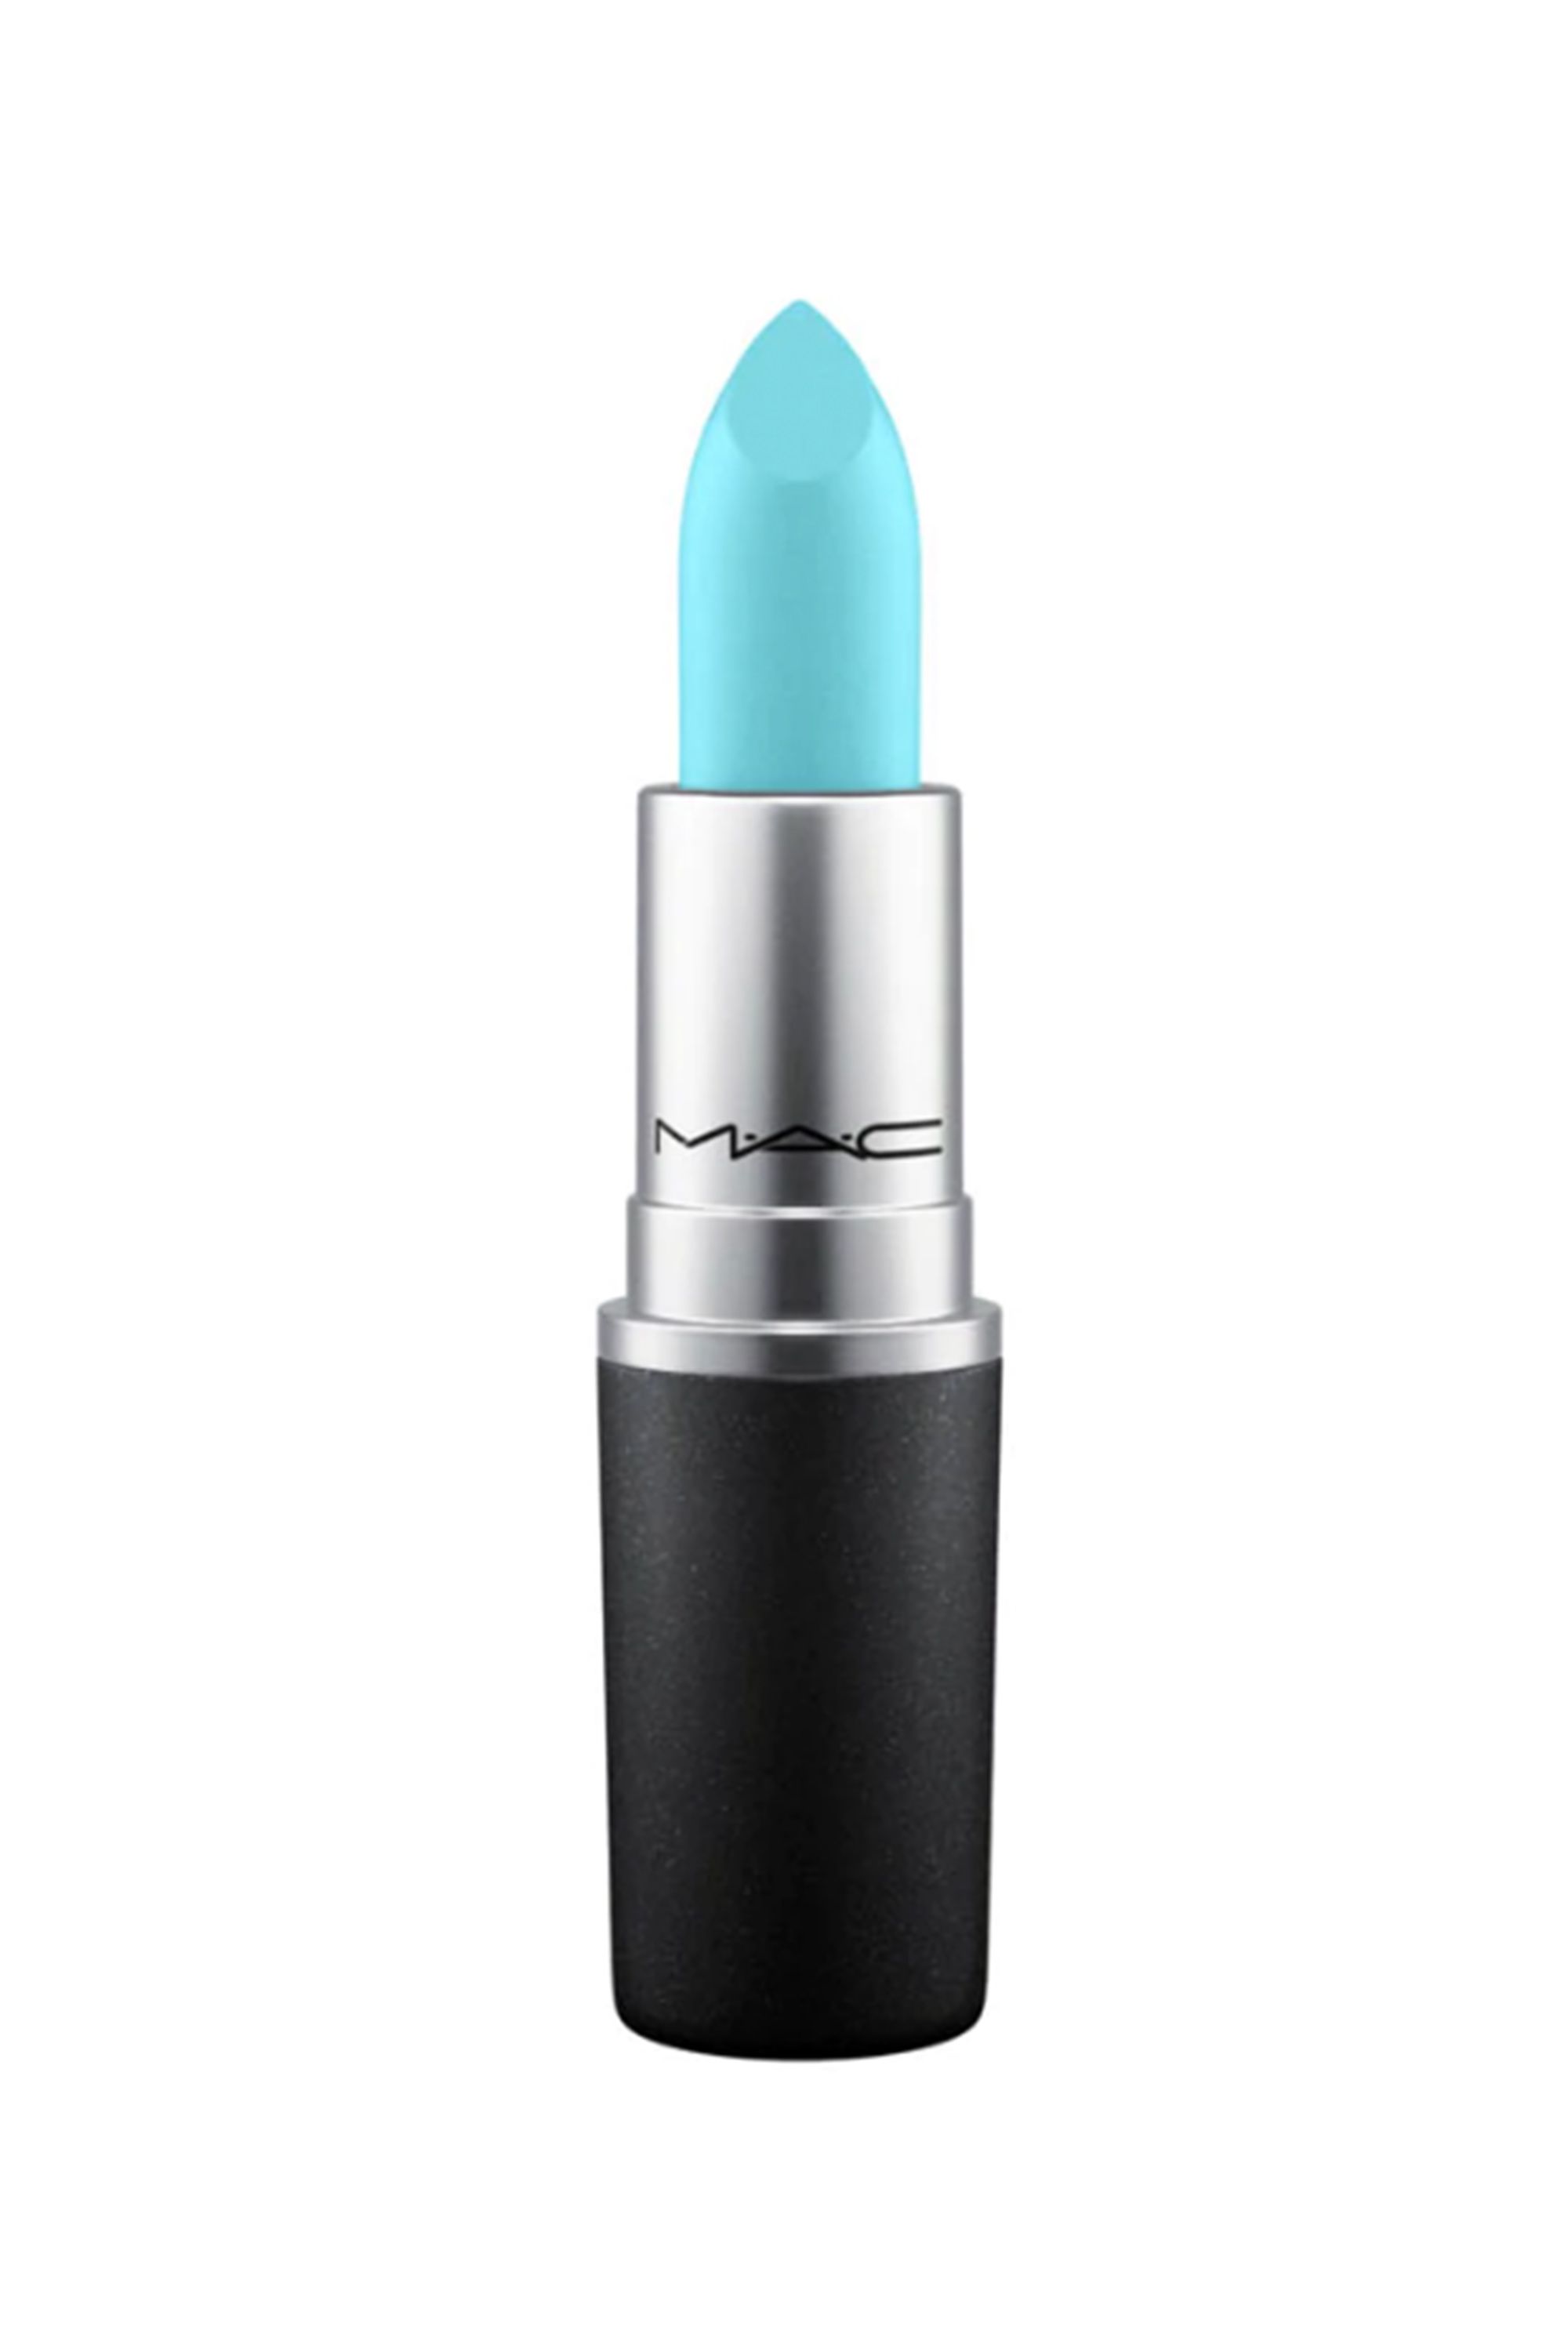 17 Blue Lipsticks That Look Good On Everyone – How To Wear Blue Lipstick